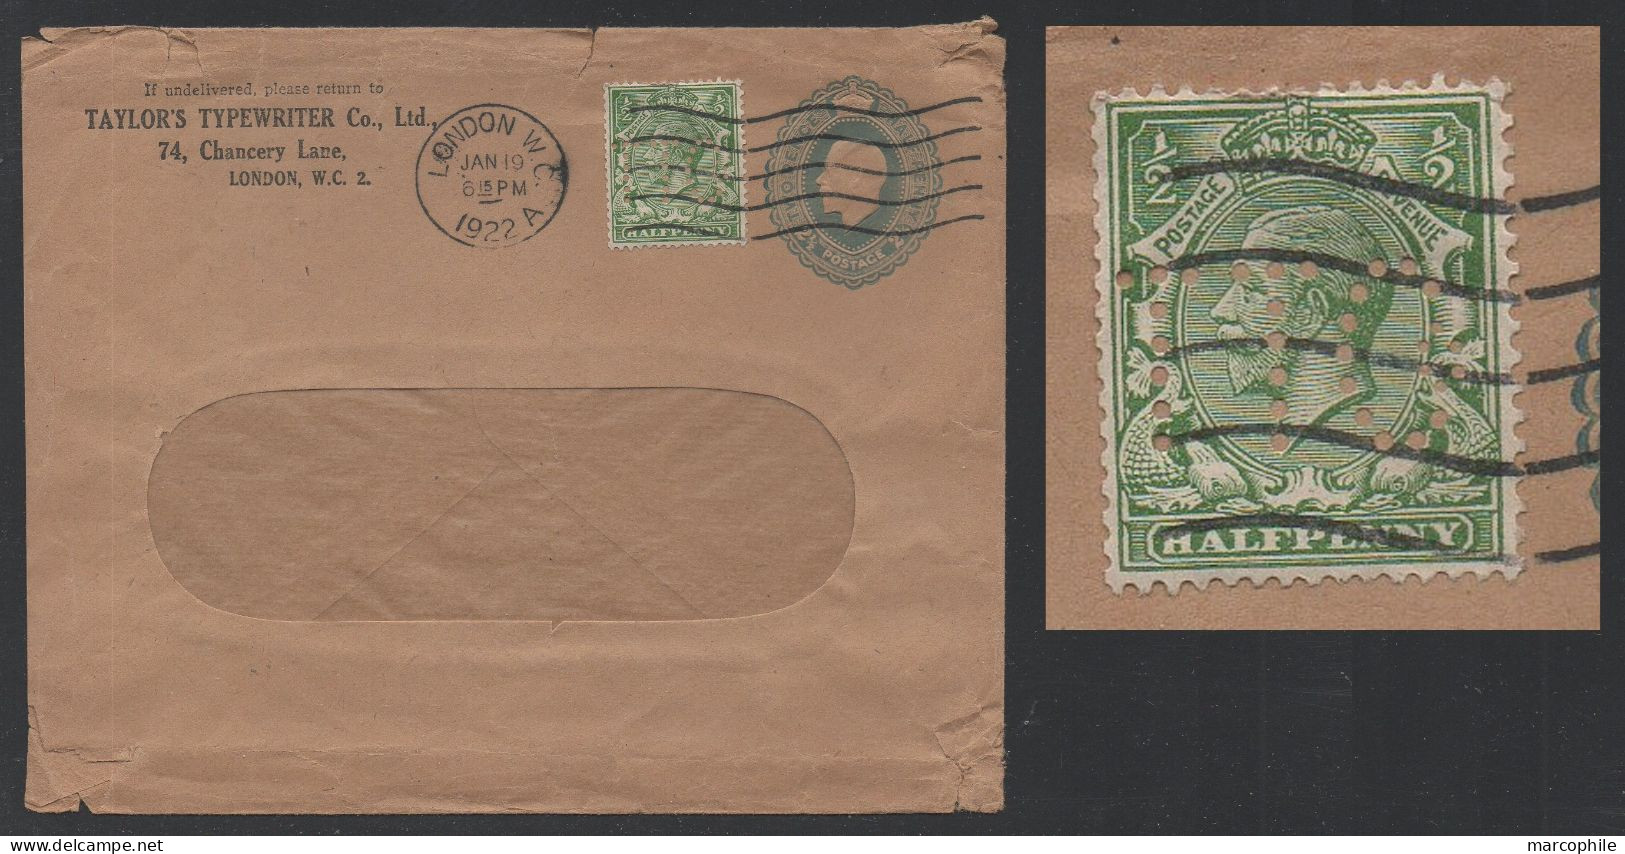 GB / 192 PERFIN "TTCo" (TAYLOR'S TYPEWRITER Co) WAX SEAL ON PRIVATE POSTAL STATIONERY ENVELOPE (ref 9012) - Perfin